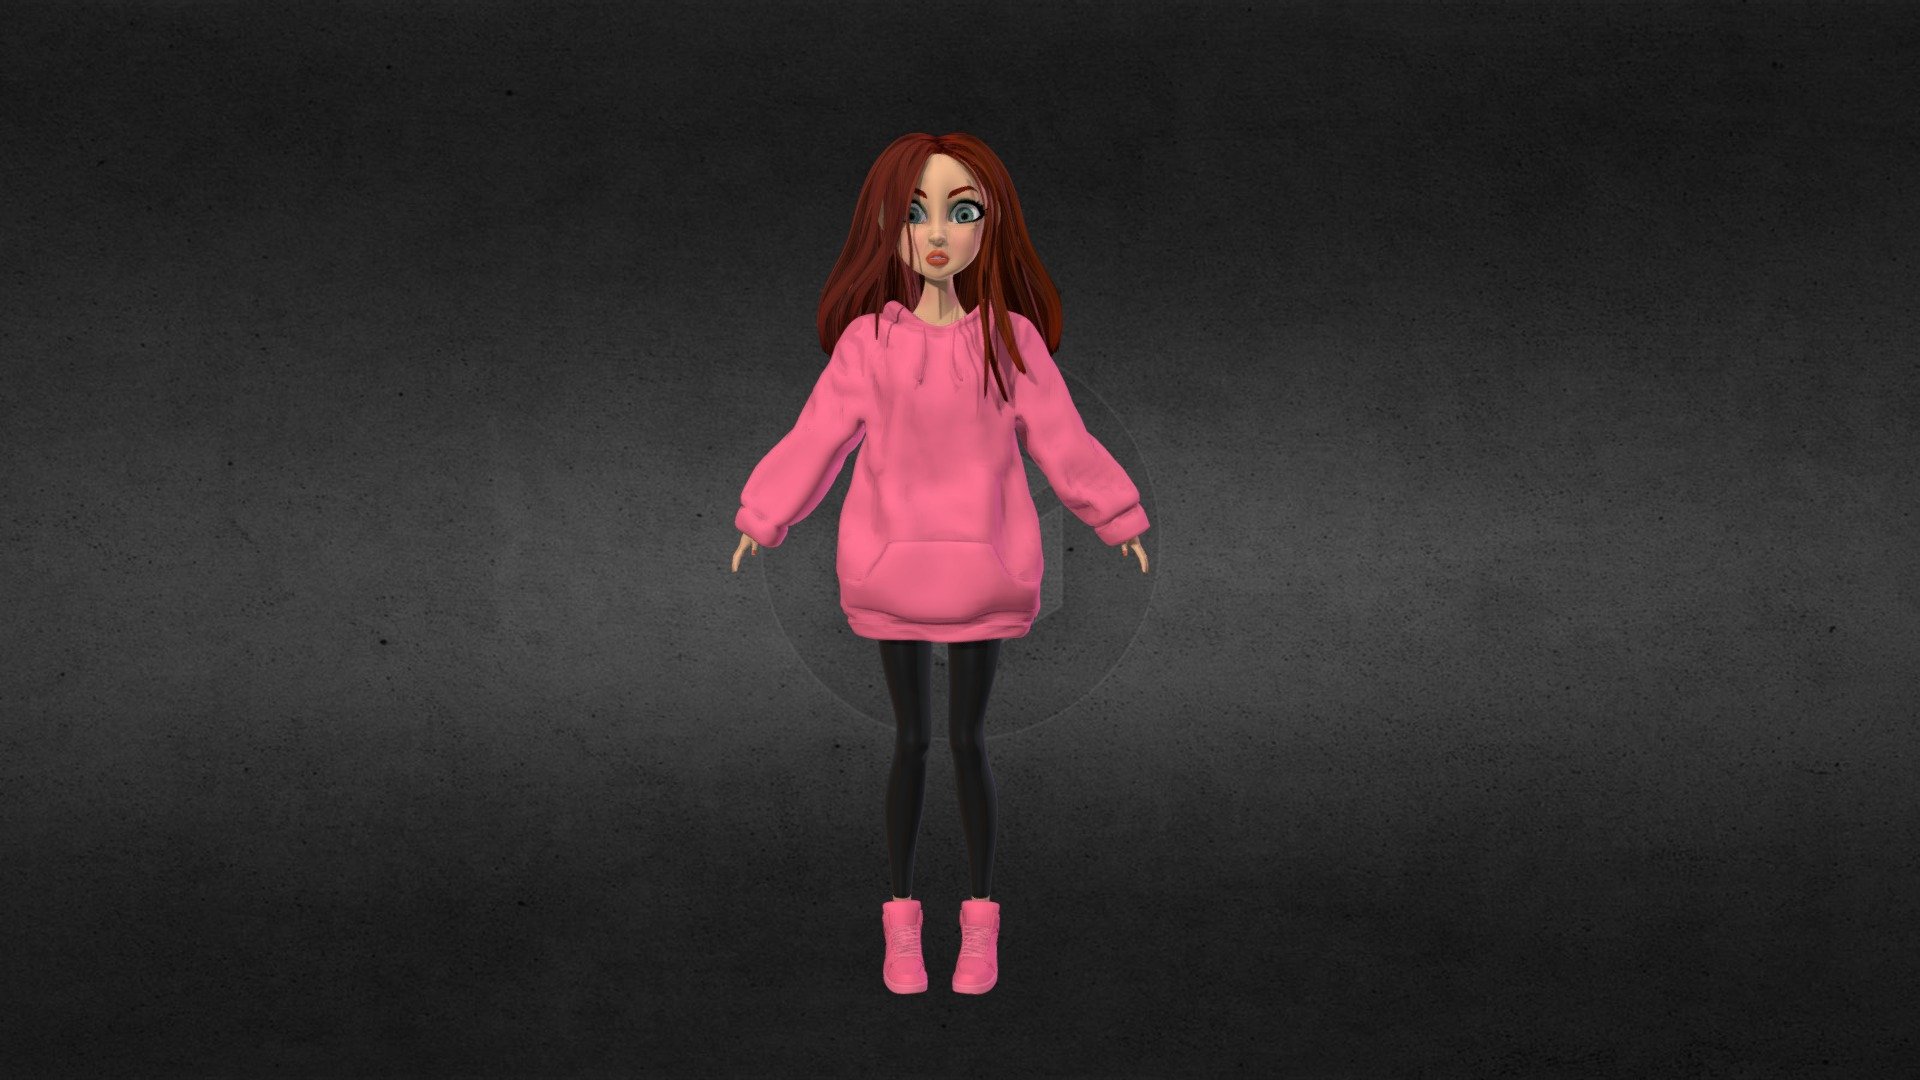 Red haired girl in a pink hoodie.
See how the model was used in a project https://www.behance.net/gallery/159471425/3D-girl-character? - Girl in a hoodie - Download Free 3D model by striderrotk 3d model